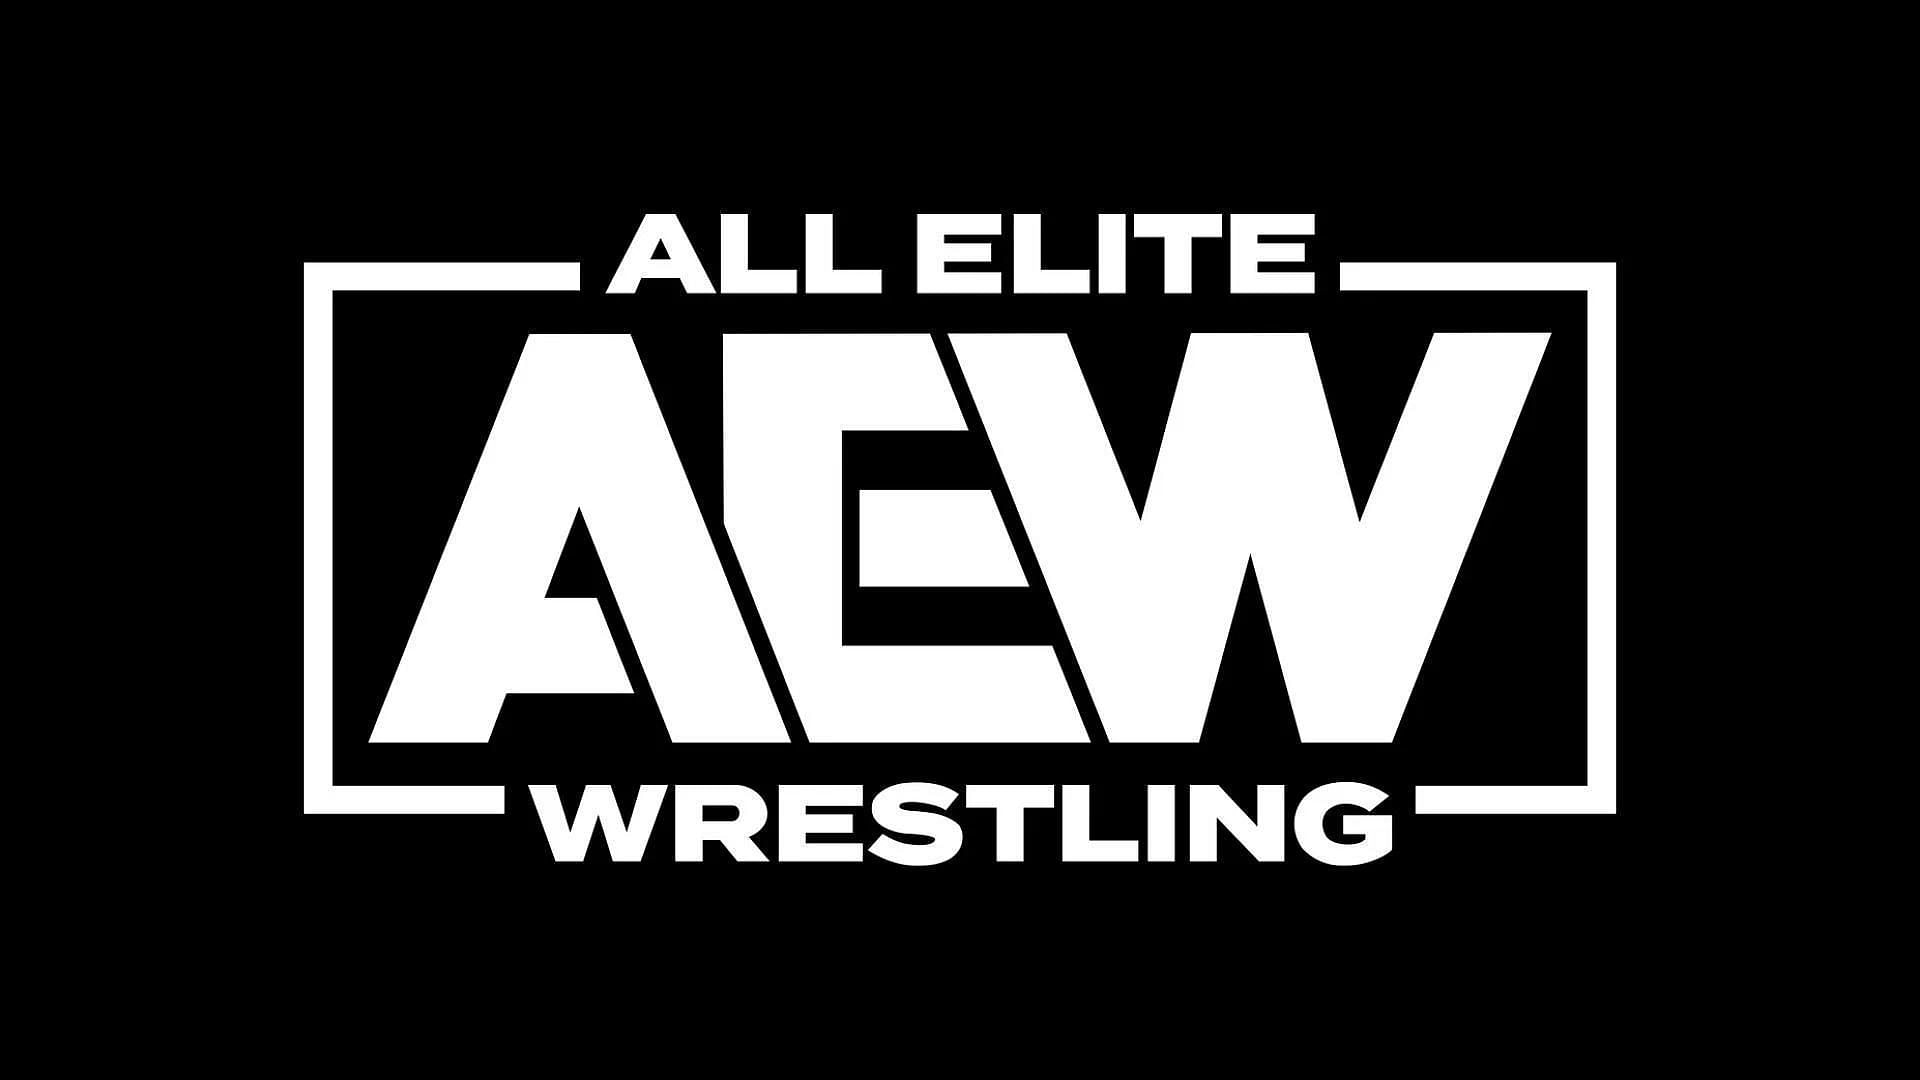 There has been an update on a former AEW name